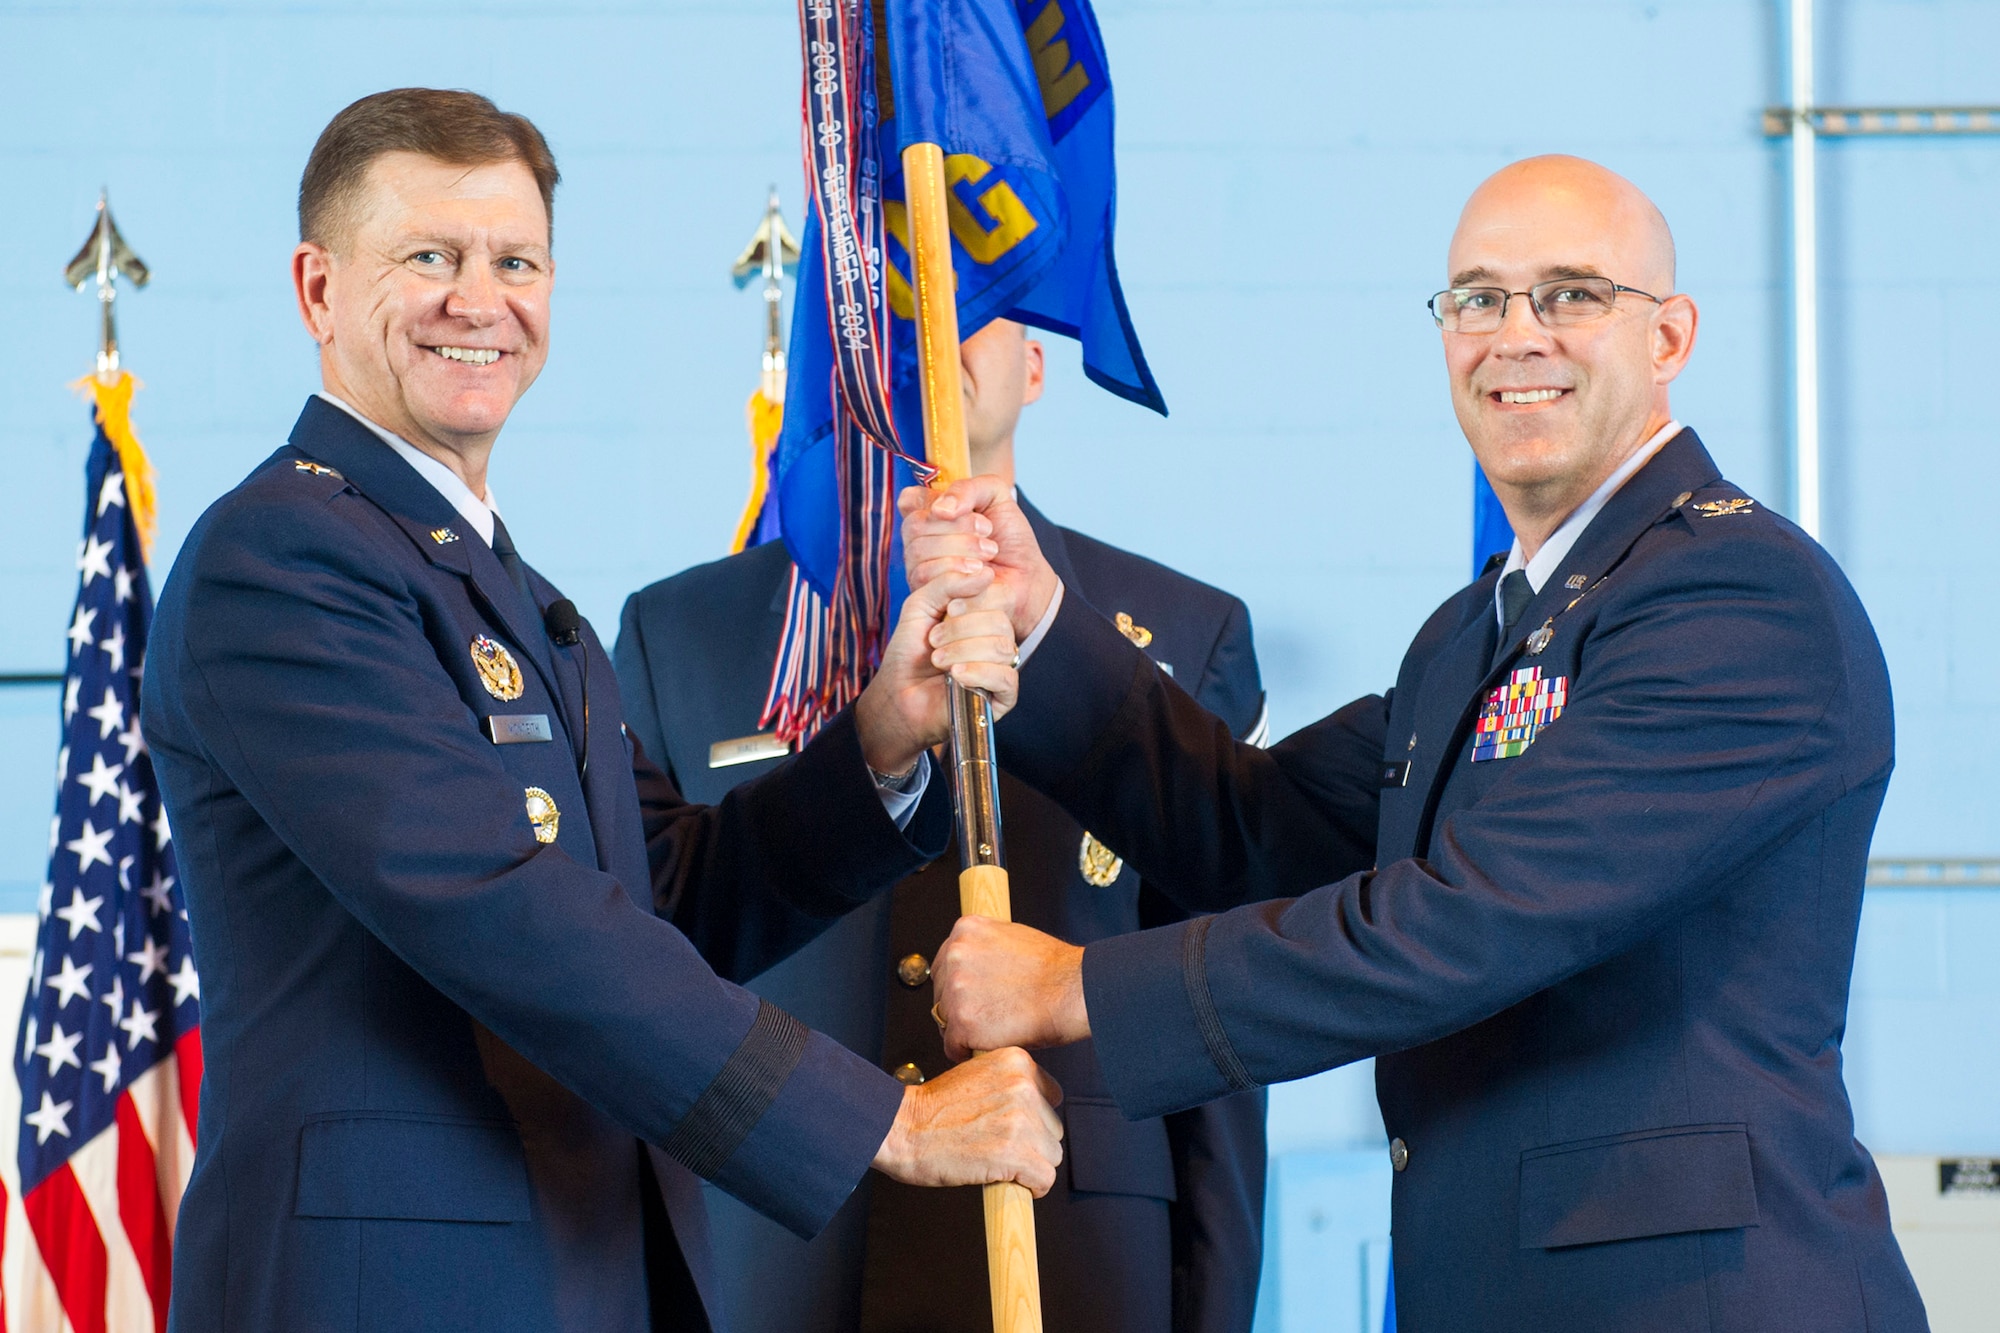 Brig. Gen. Wayne Monteith, commander of the 45th Space Wing presents Col. Steven Lang, commander of the 45th Launch Group and the 45th Operations Group with the 45th OG guidon, June 1, 2018 at Cape Canaveral Air Force Station, Fla. Lang assumed command from Col. Burton Catledge, and took on the role of the 45th LCG and the 45th OG commander. (U.S. Air Force photo by Phil Sunkel)